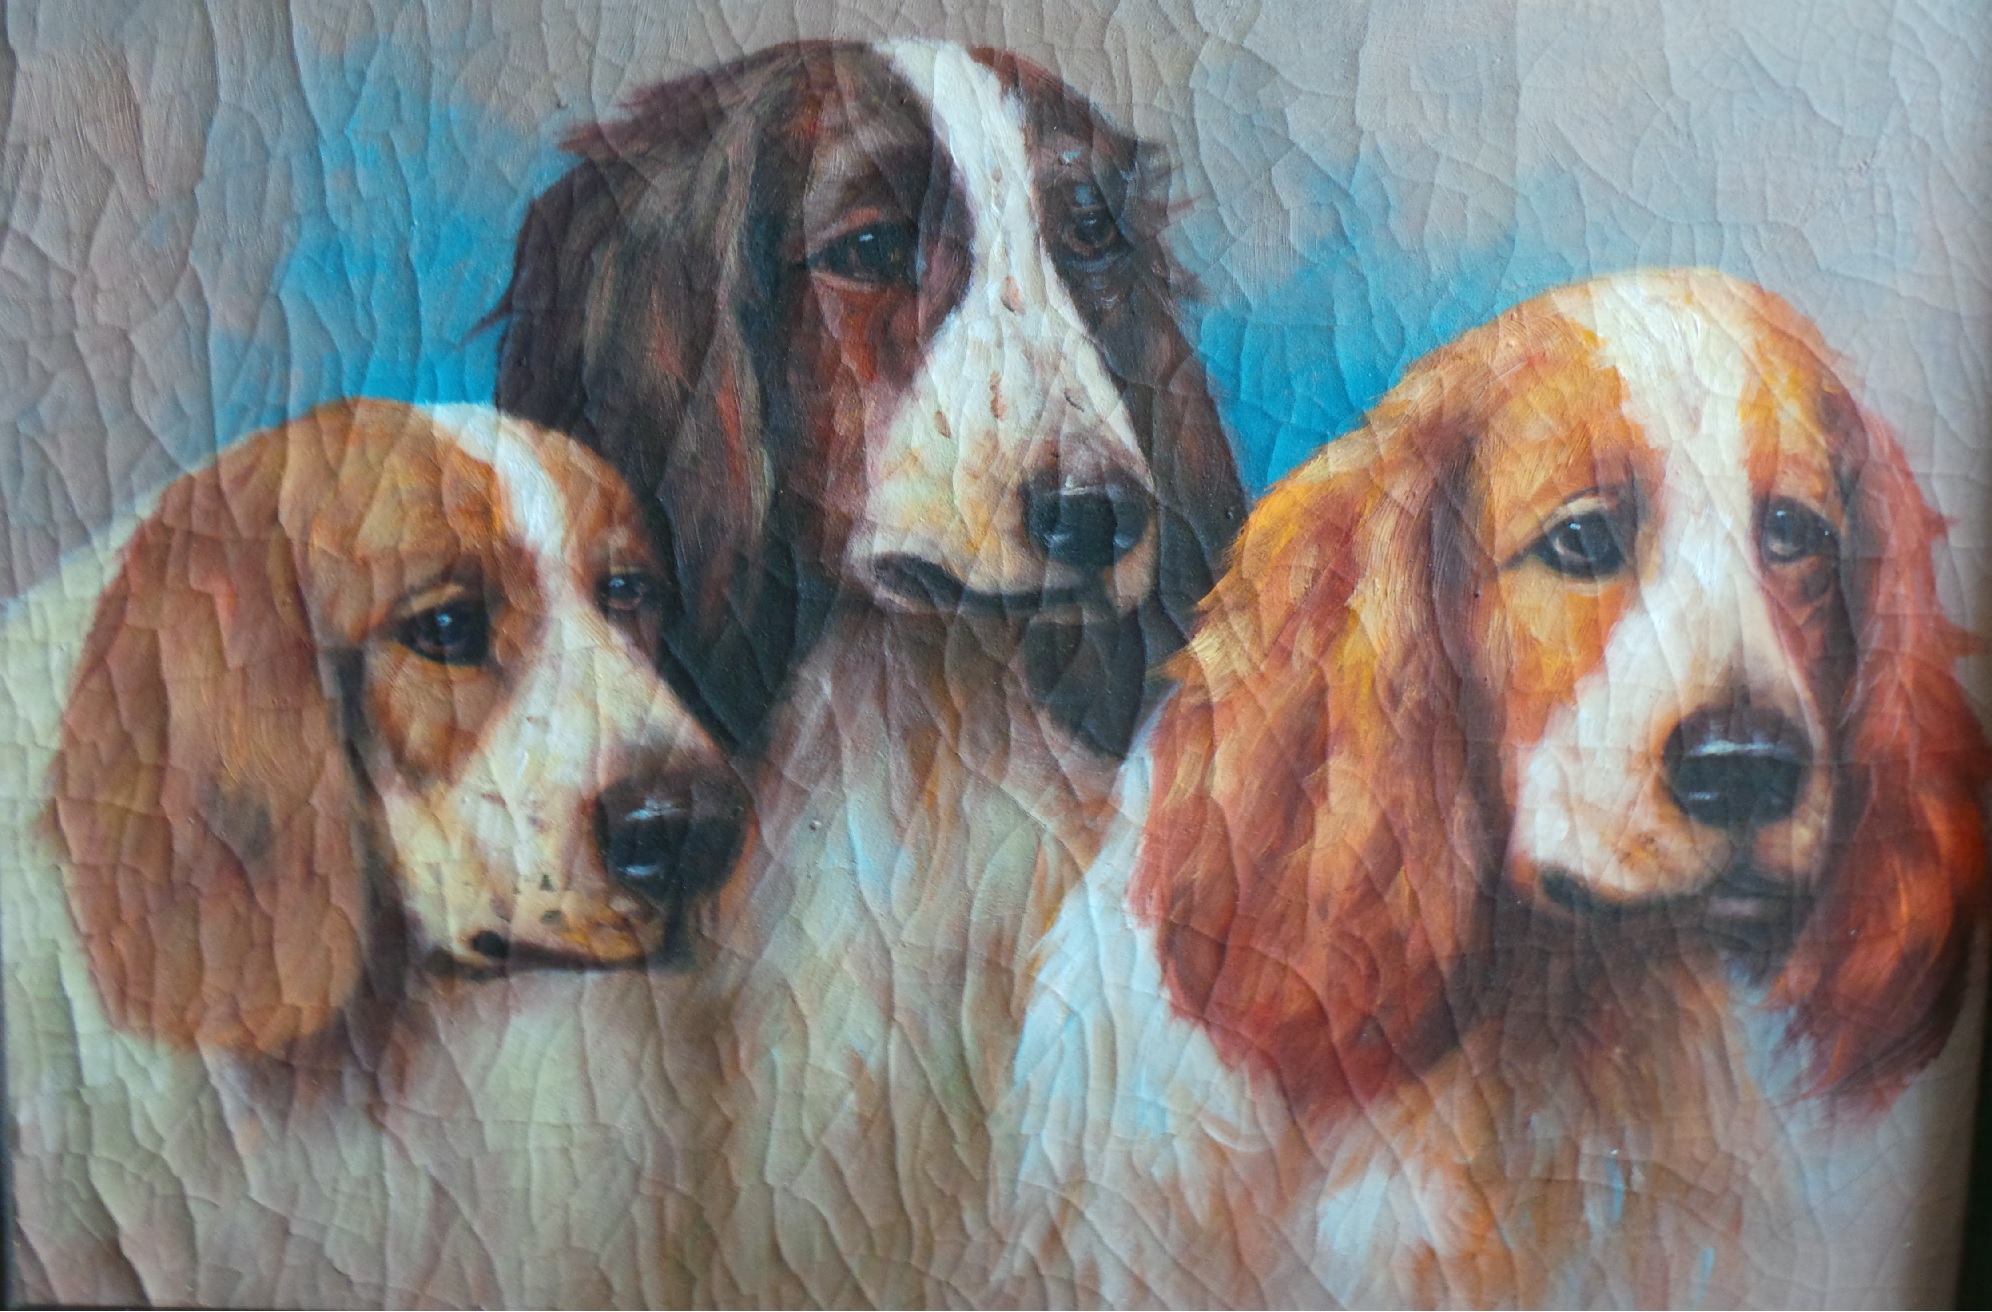 VINTAGE OIL PAINTING ON CANVAS PORTRAIT OF THREE DOGS.